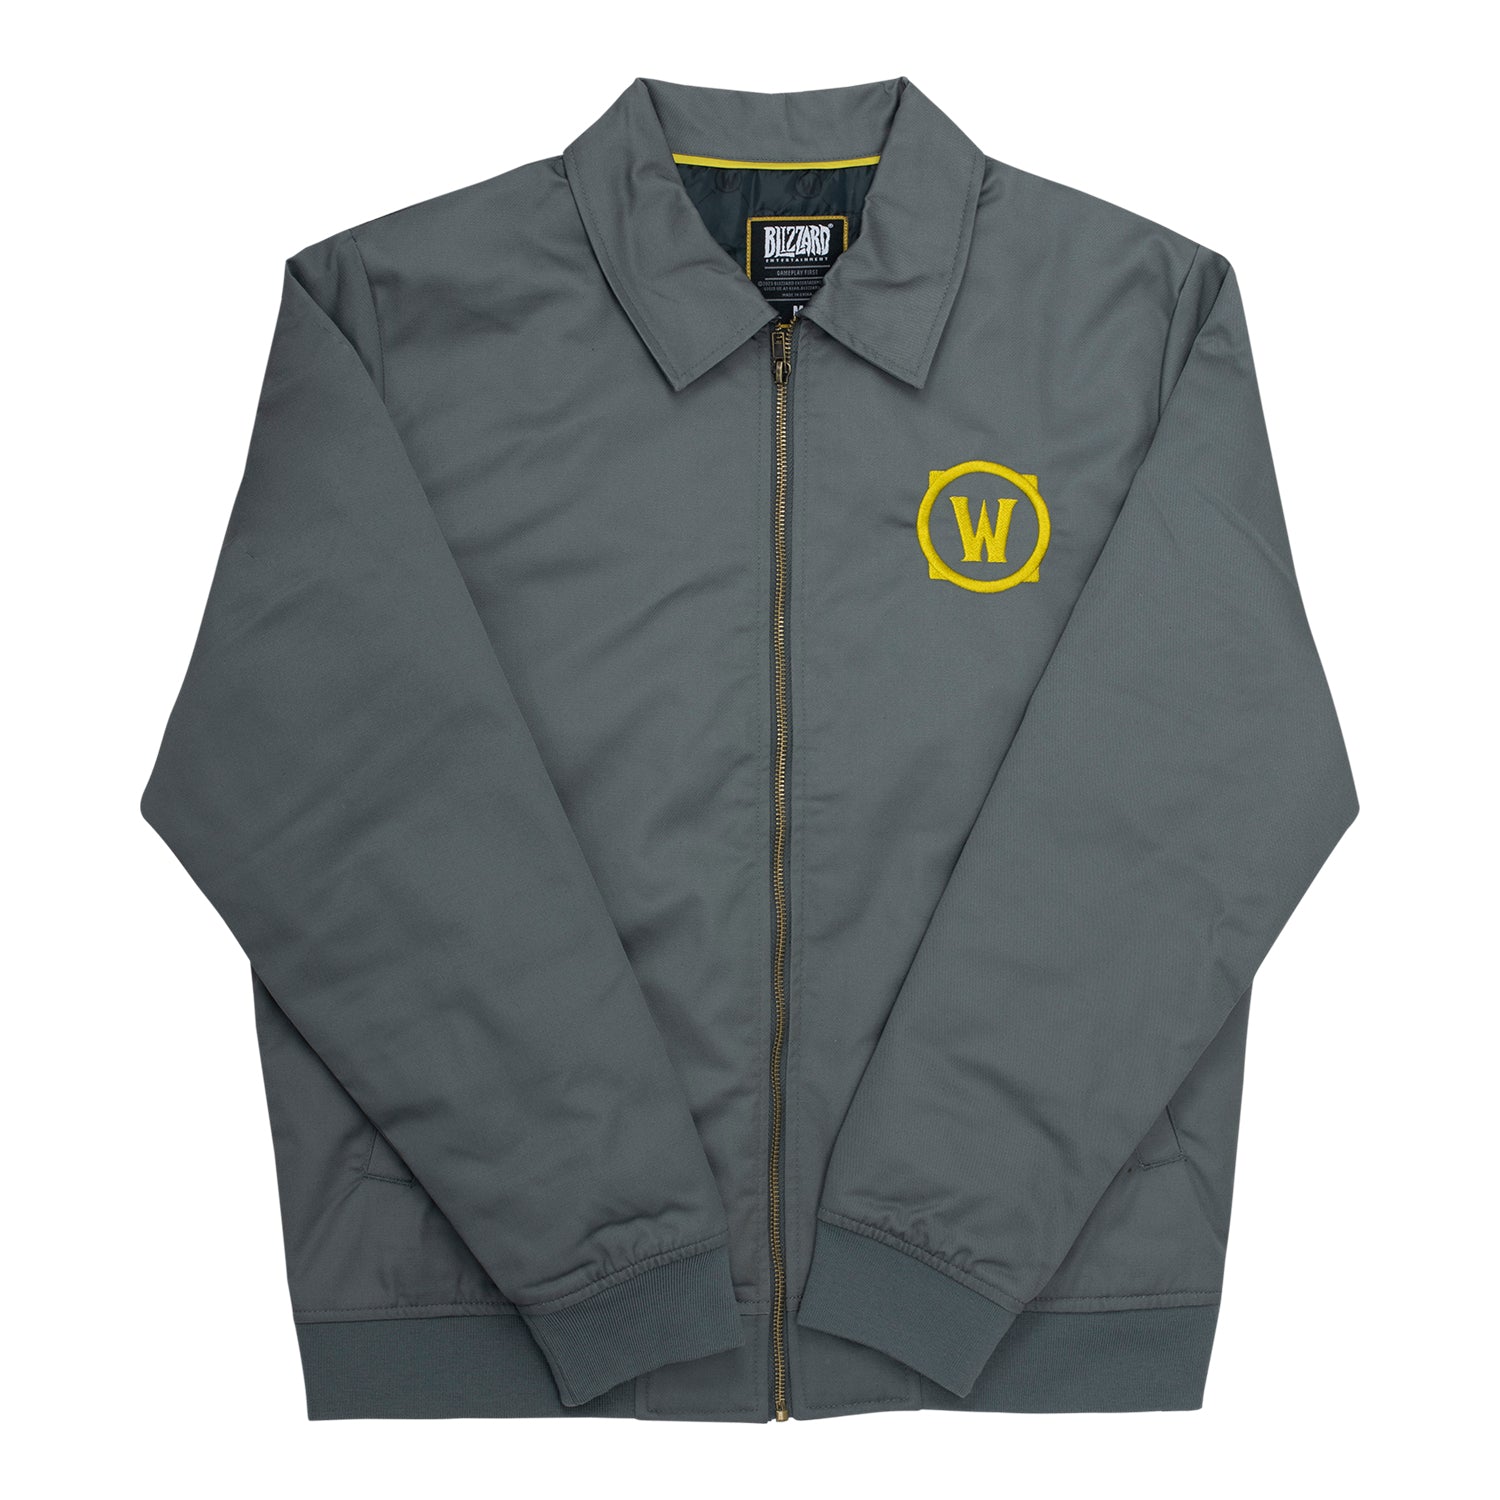 World of Warcraft Grey Work Jacket - Front View